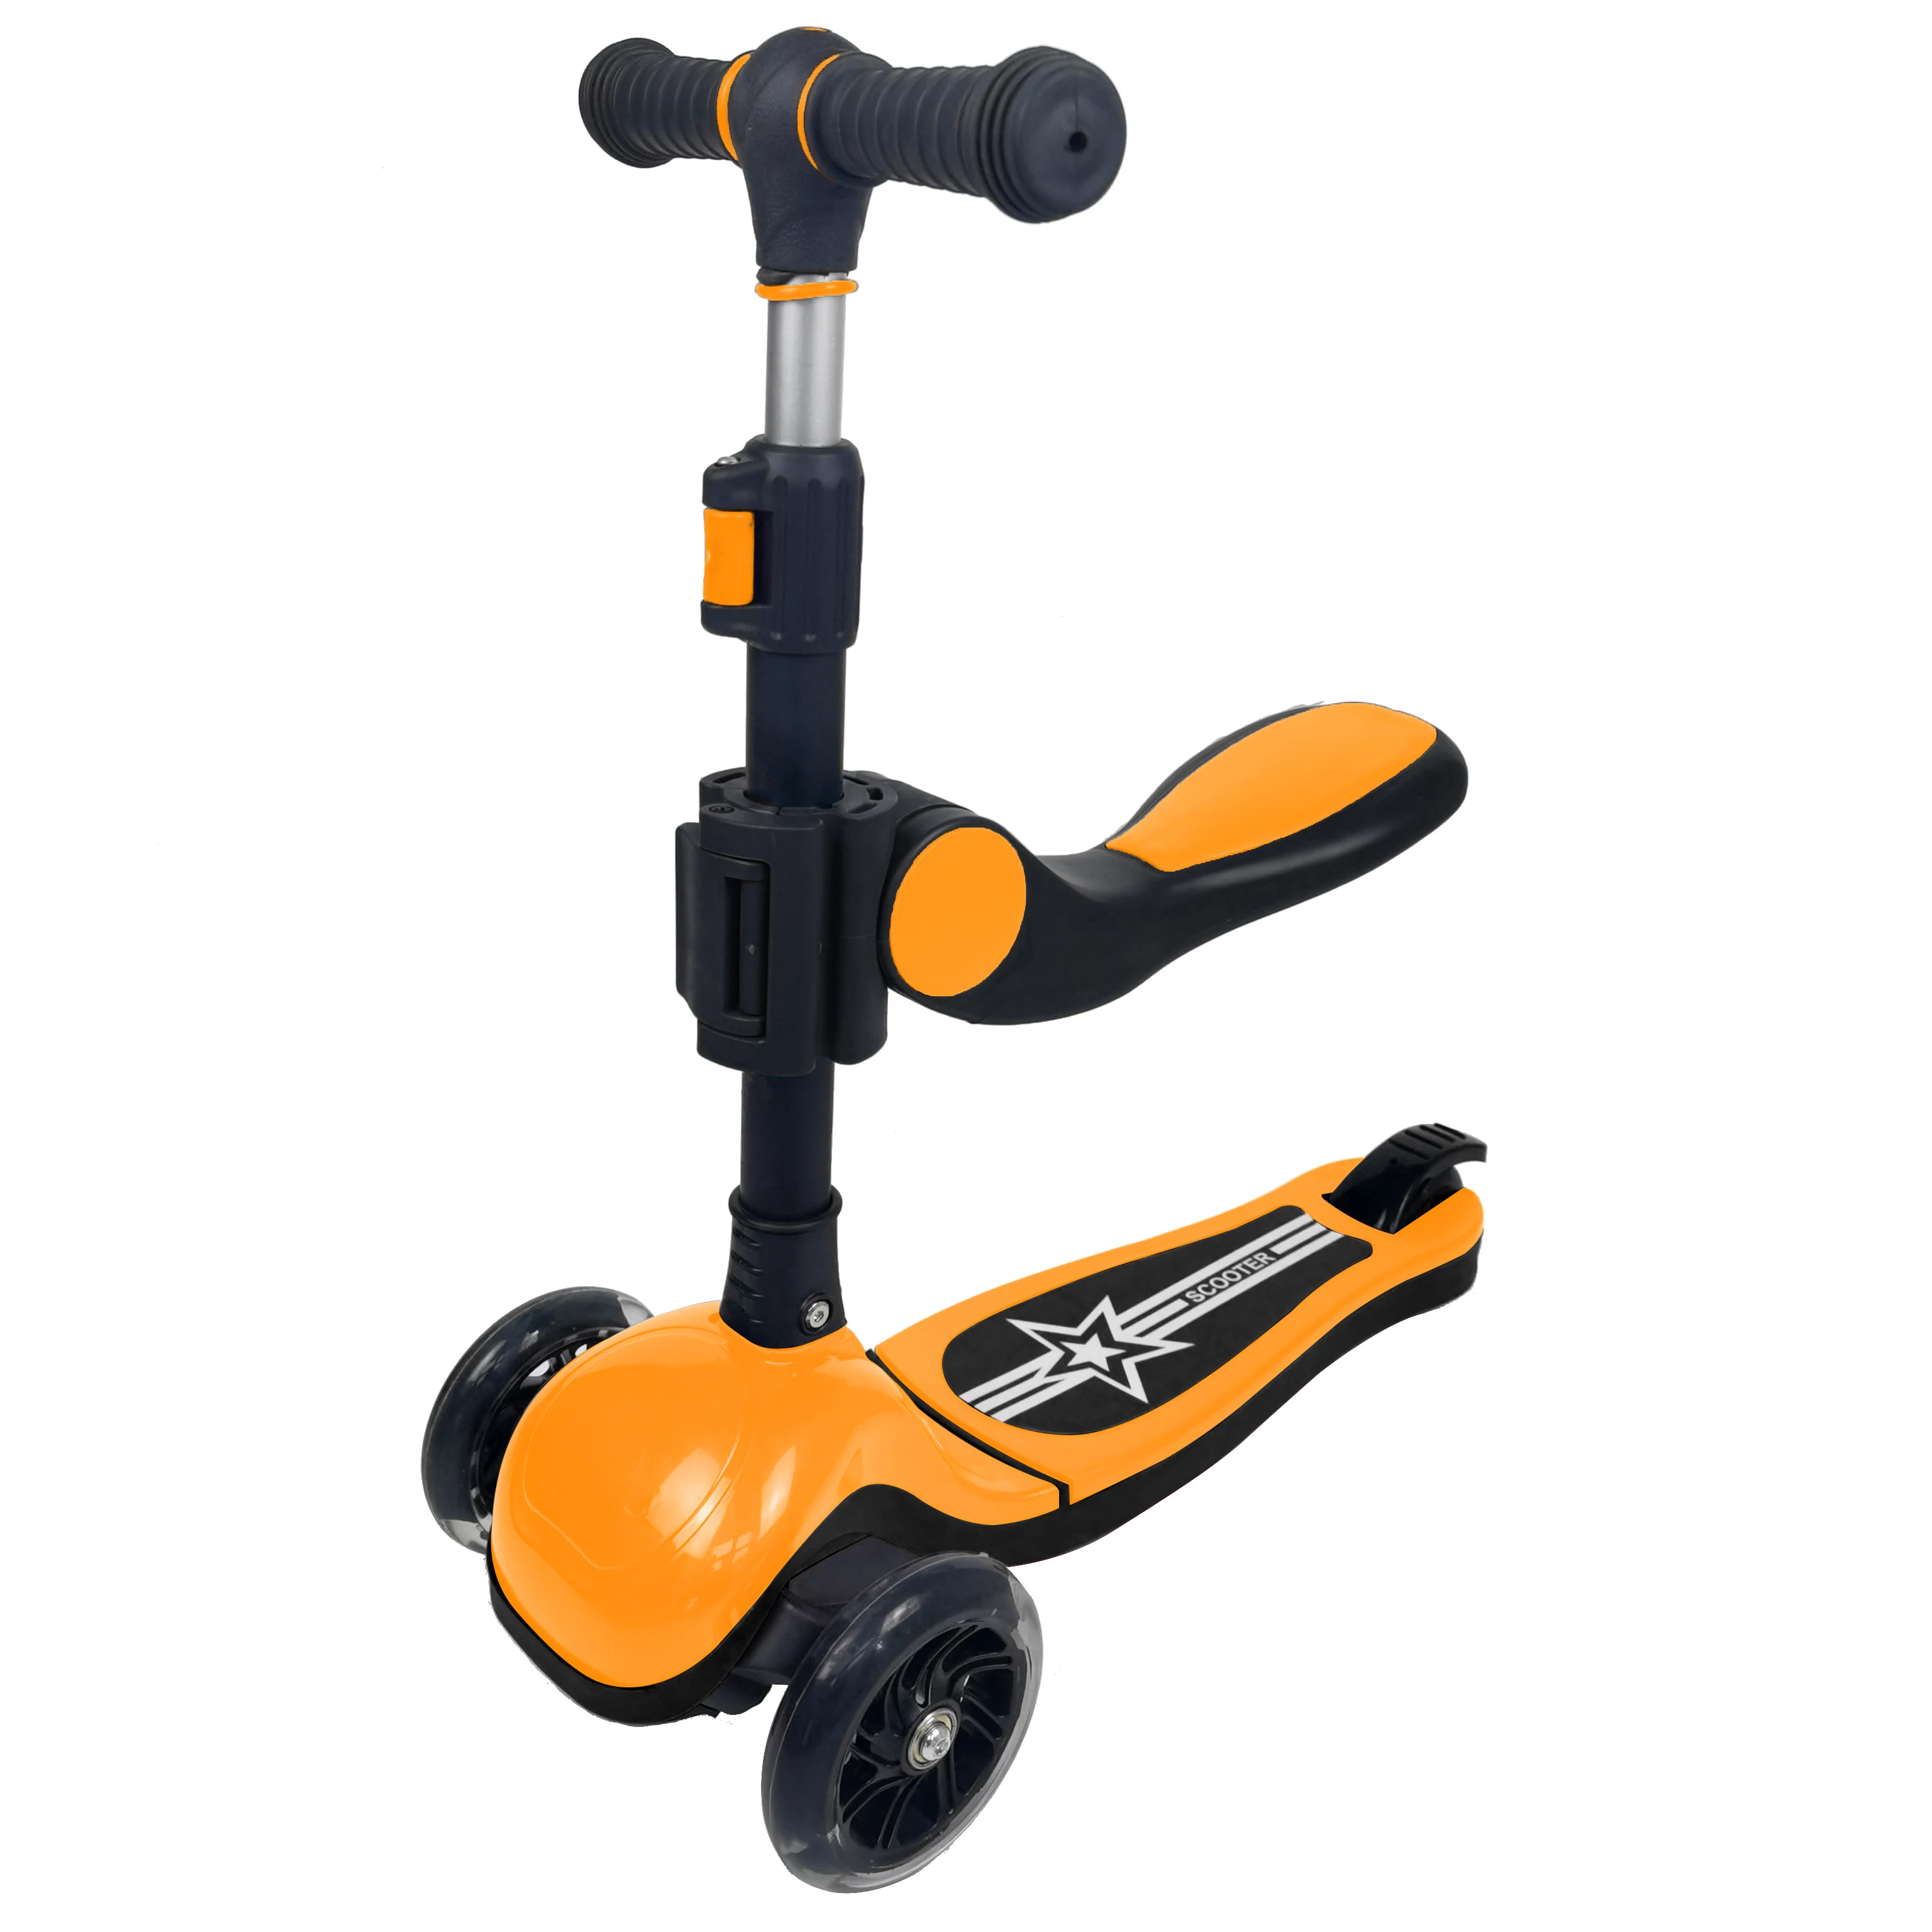 

Cheap price multifunction Lower MOQ kids scooter 3 wheel Flashing foldable children kick scooter with light